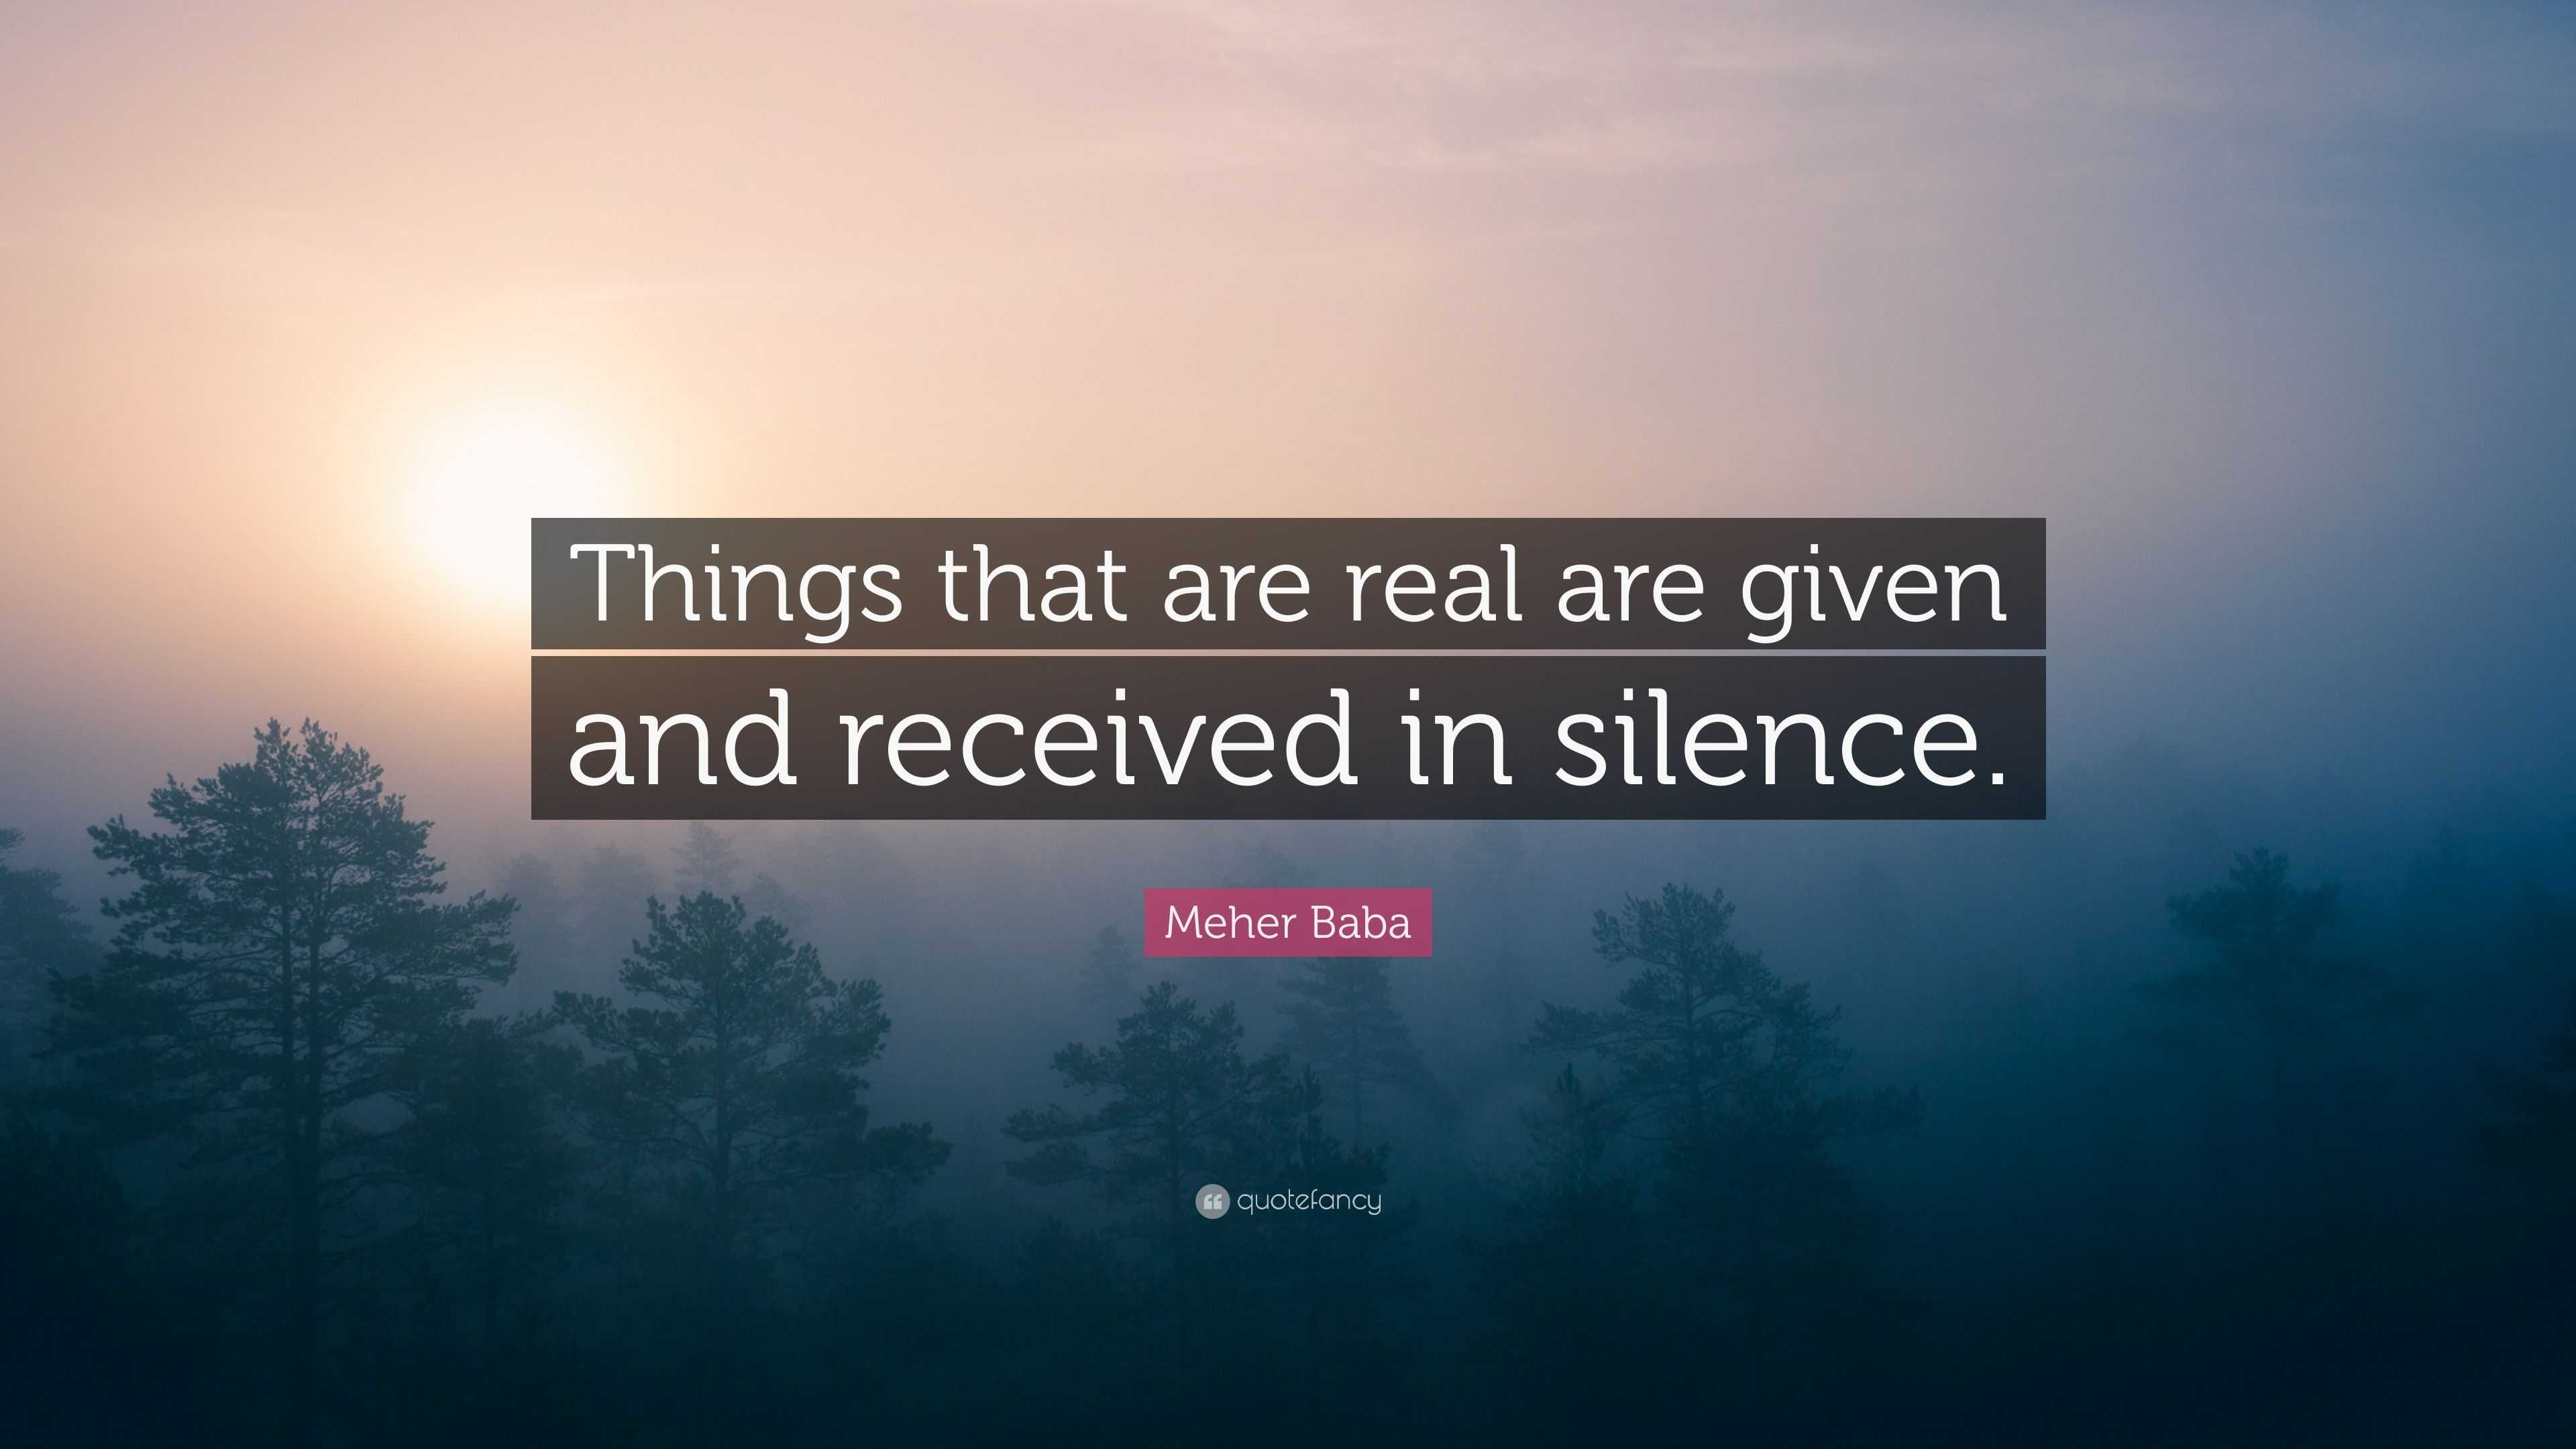 Meher Baba Quote: “Things that are real are given and received in silence.”